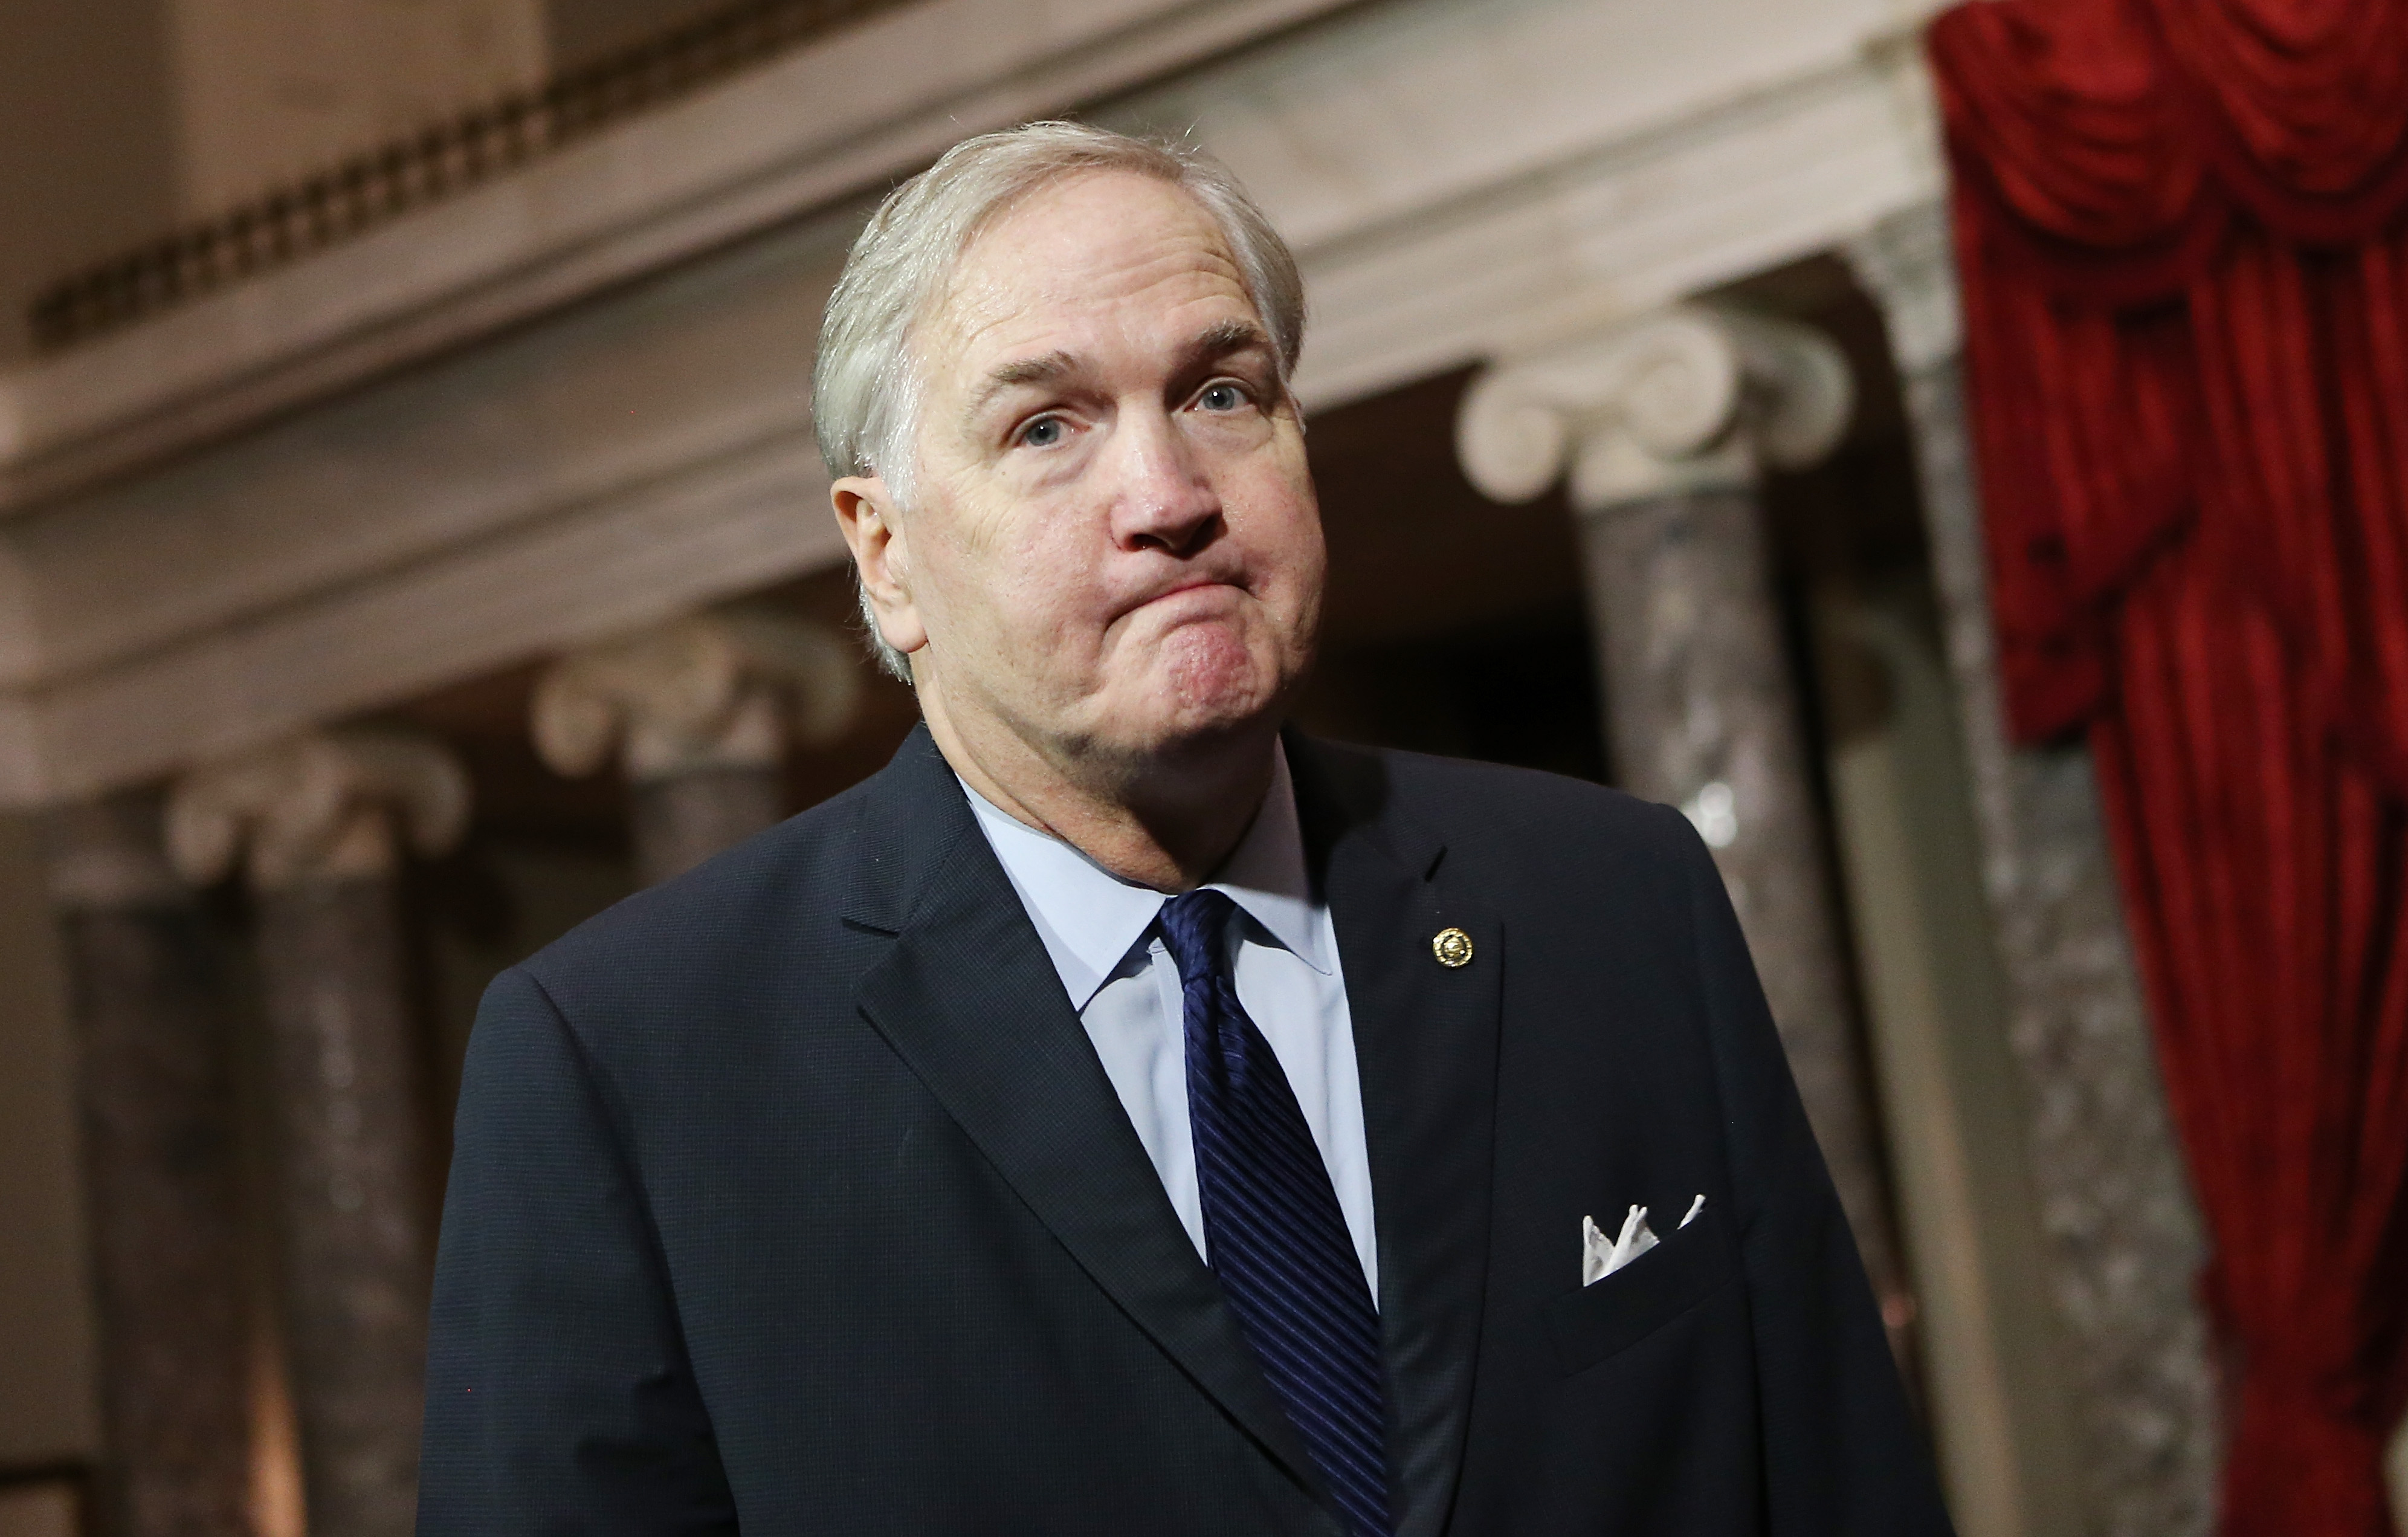 Sen. Luther Strange could be unseated today